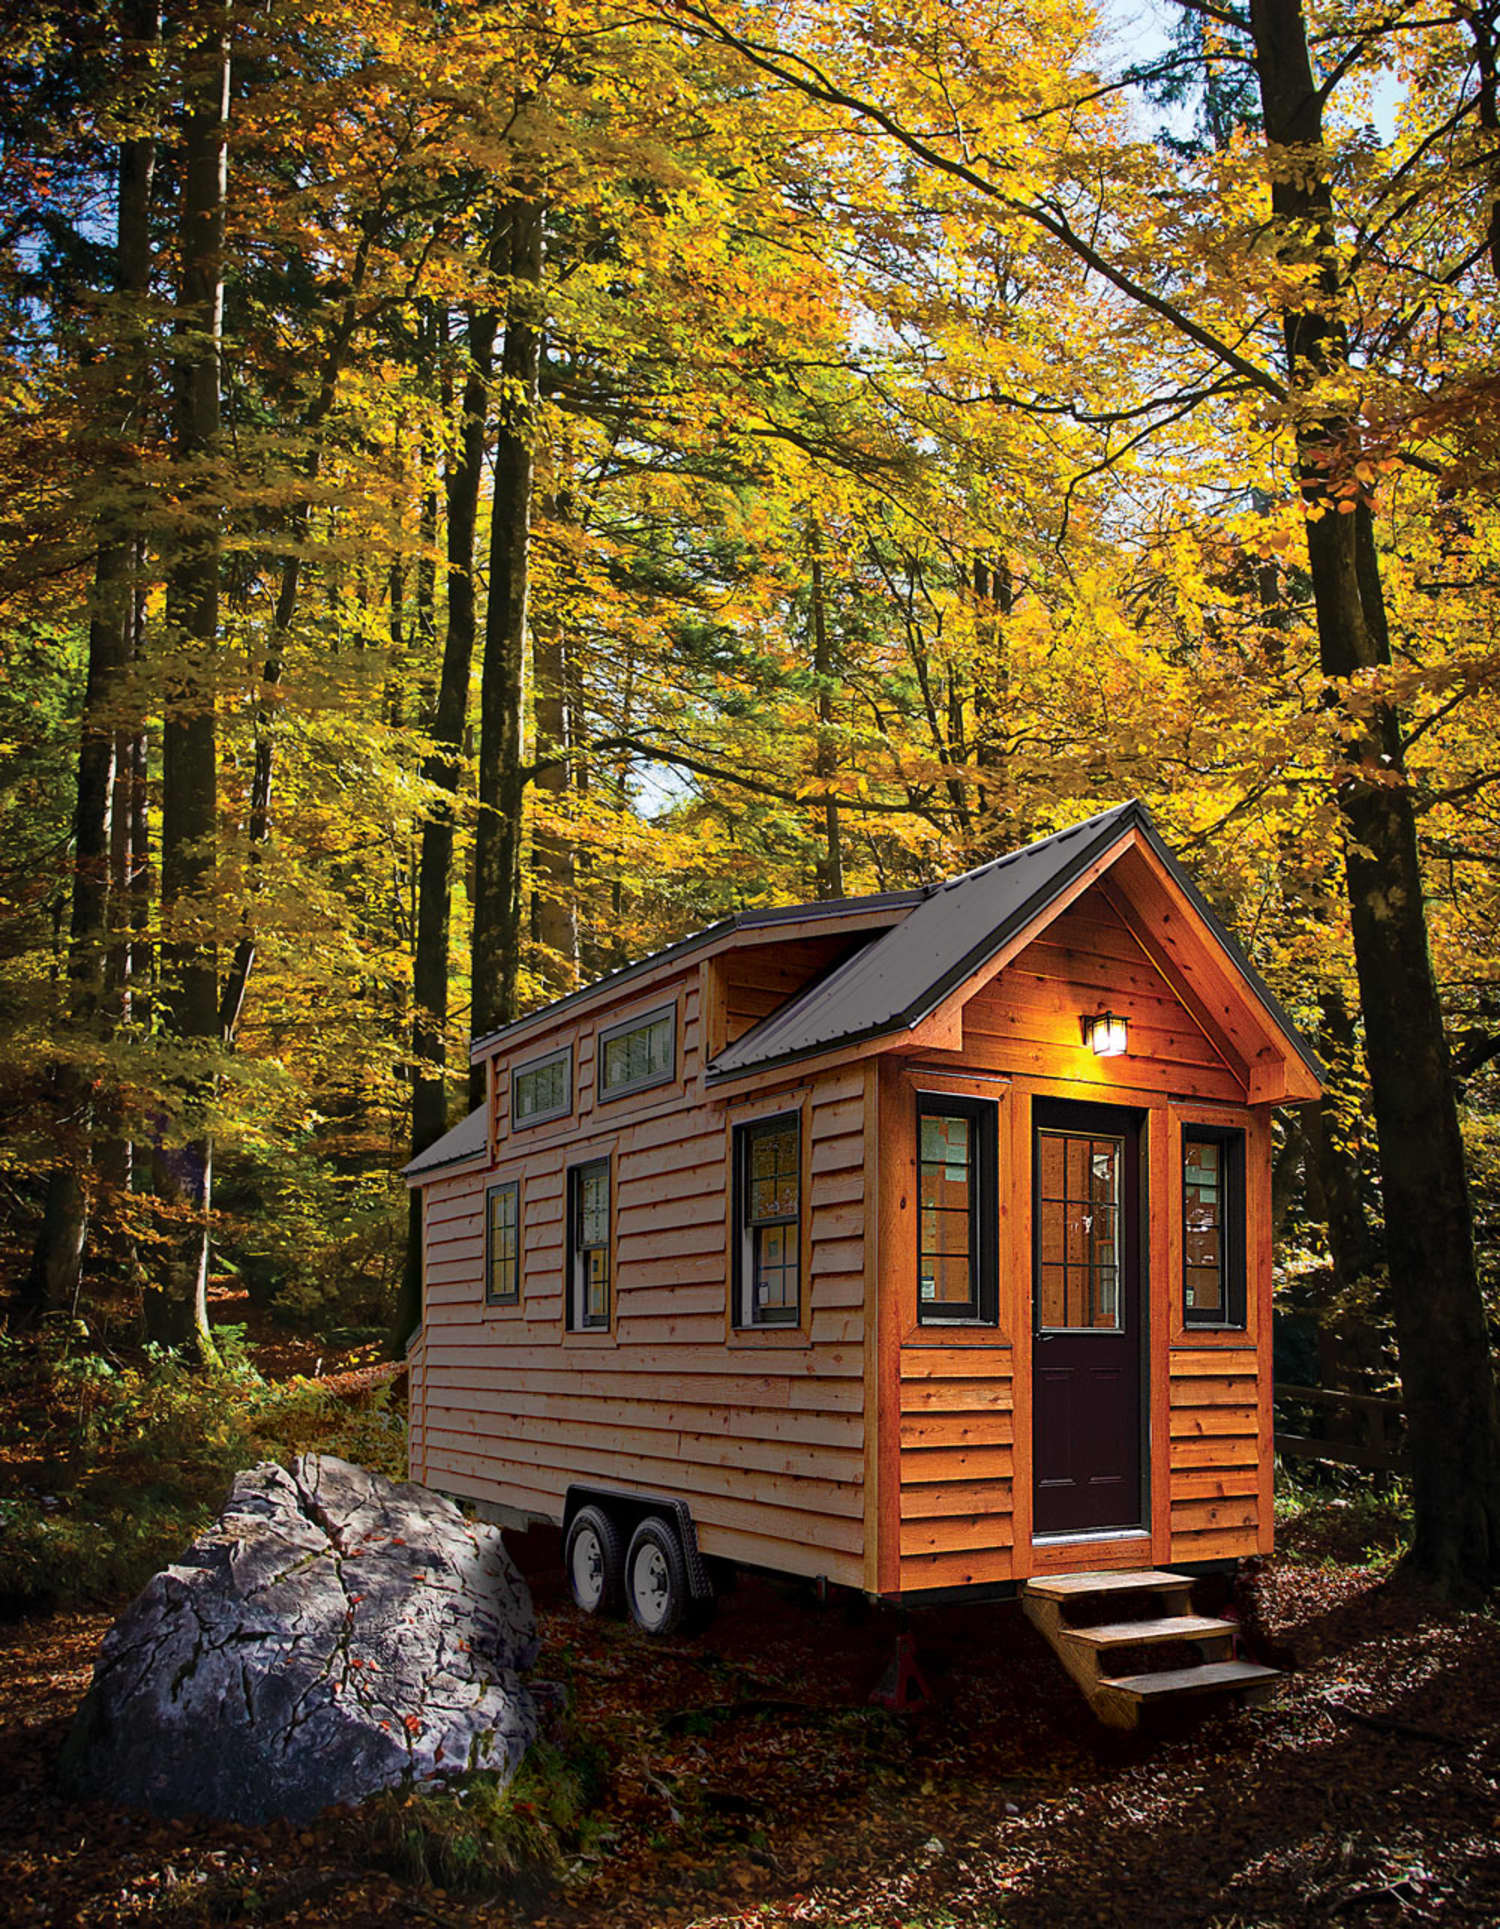 6 Tiny Houses Under $30K - Affordable, Finished Tiny Houses (on Wheels or Fixed)